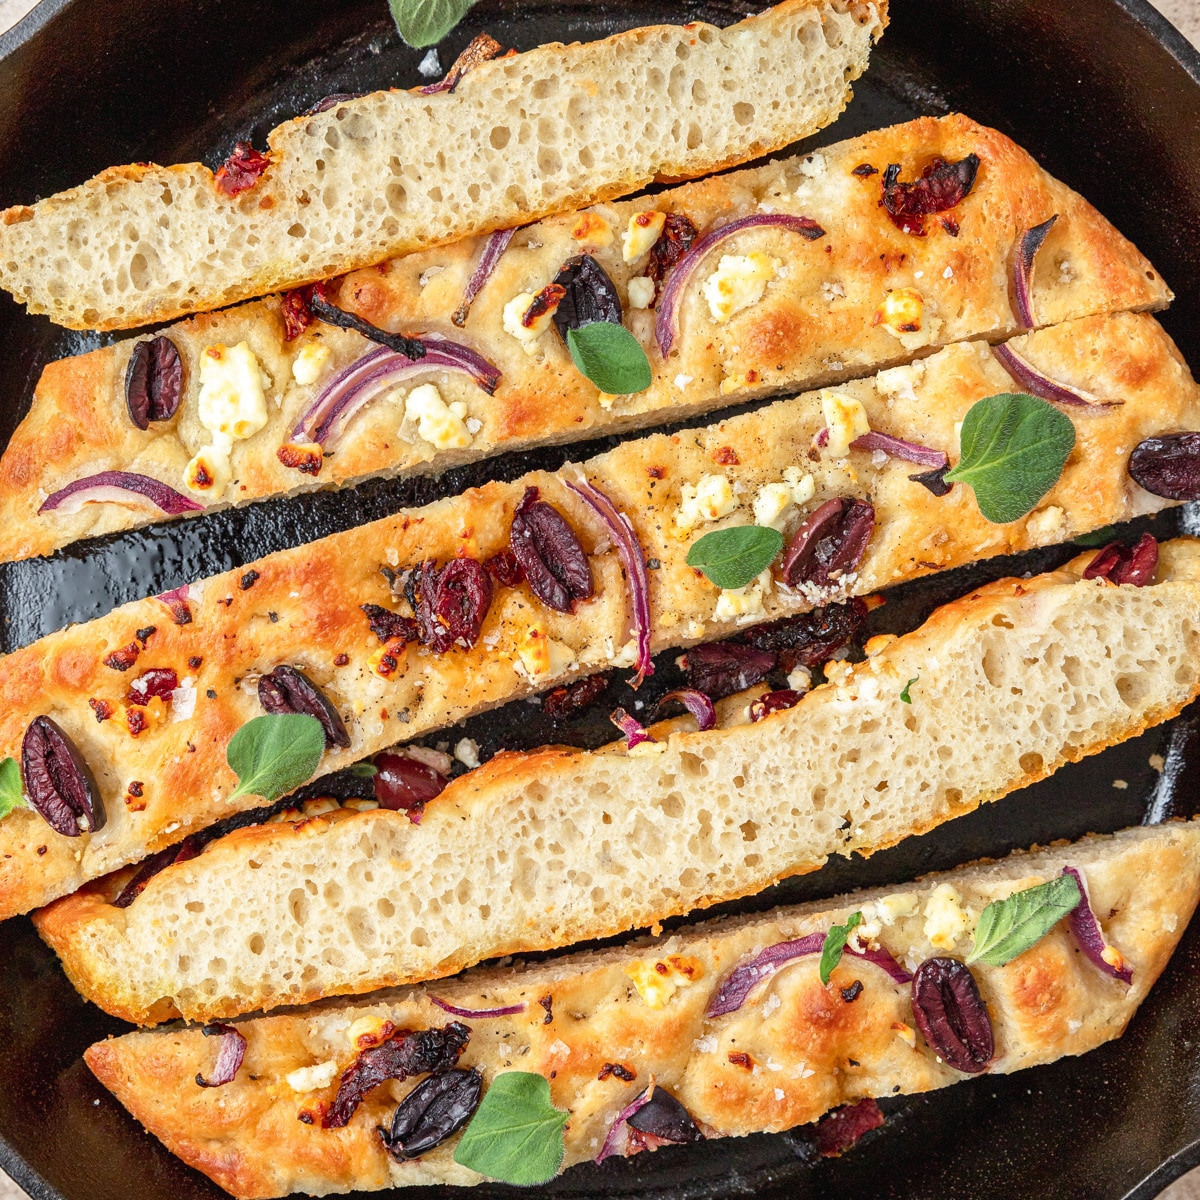 sundried tomato and olive focaccia cut into slices.